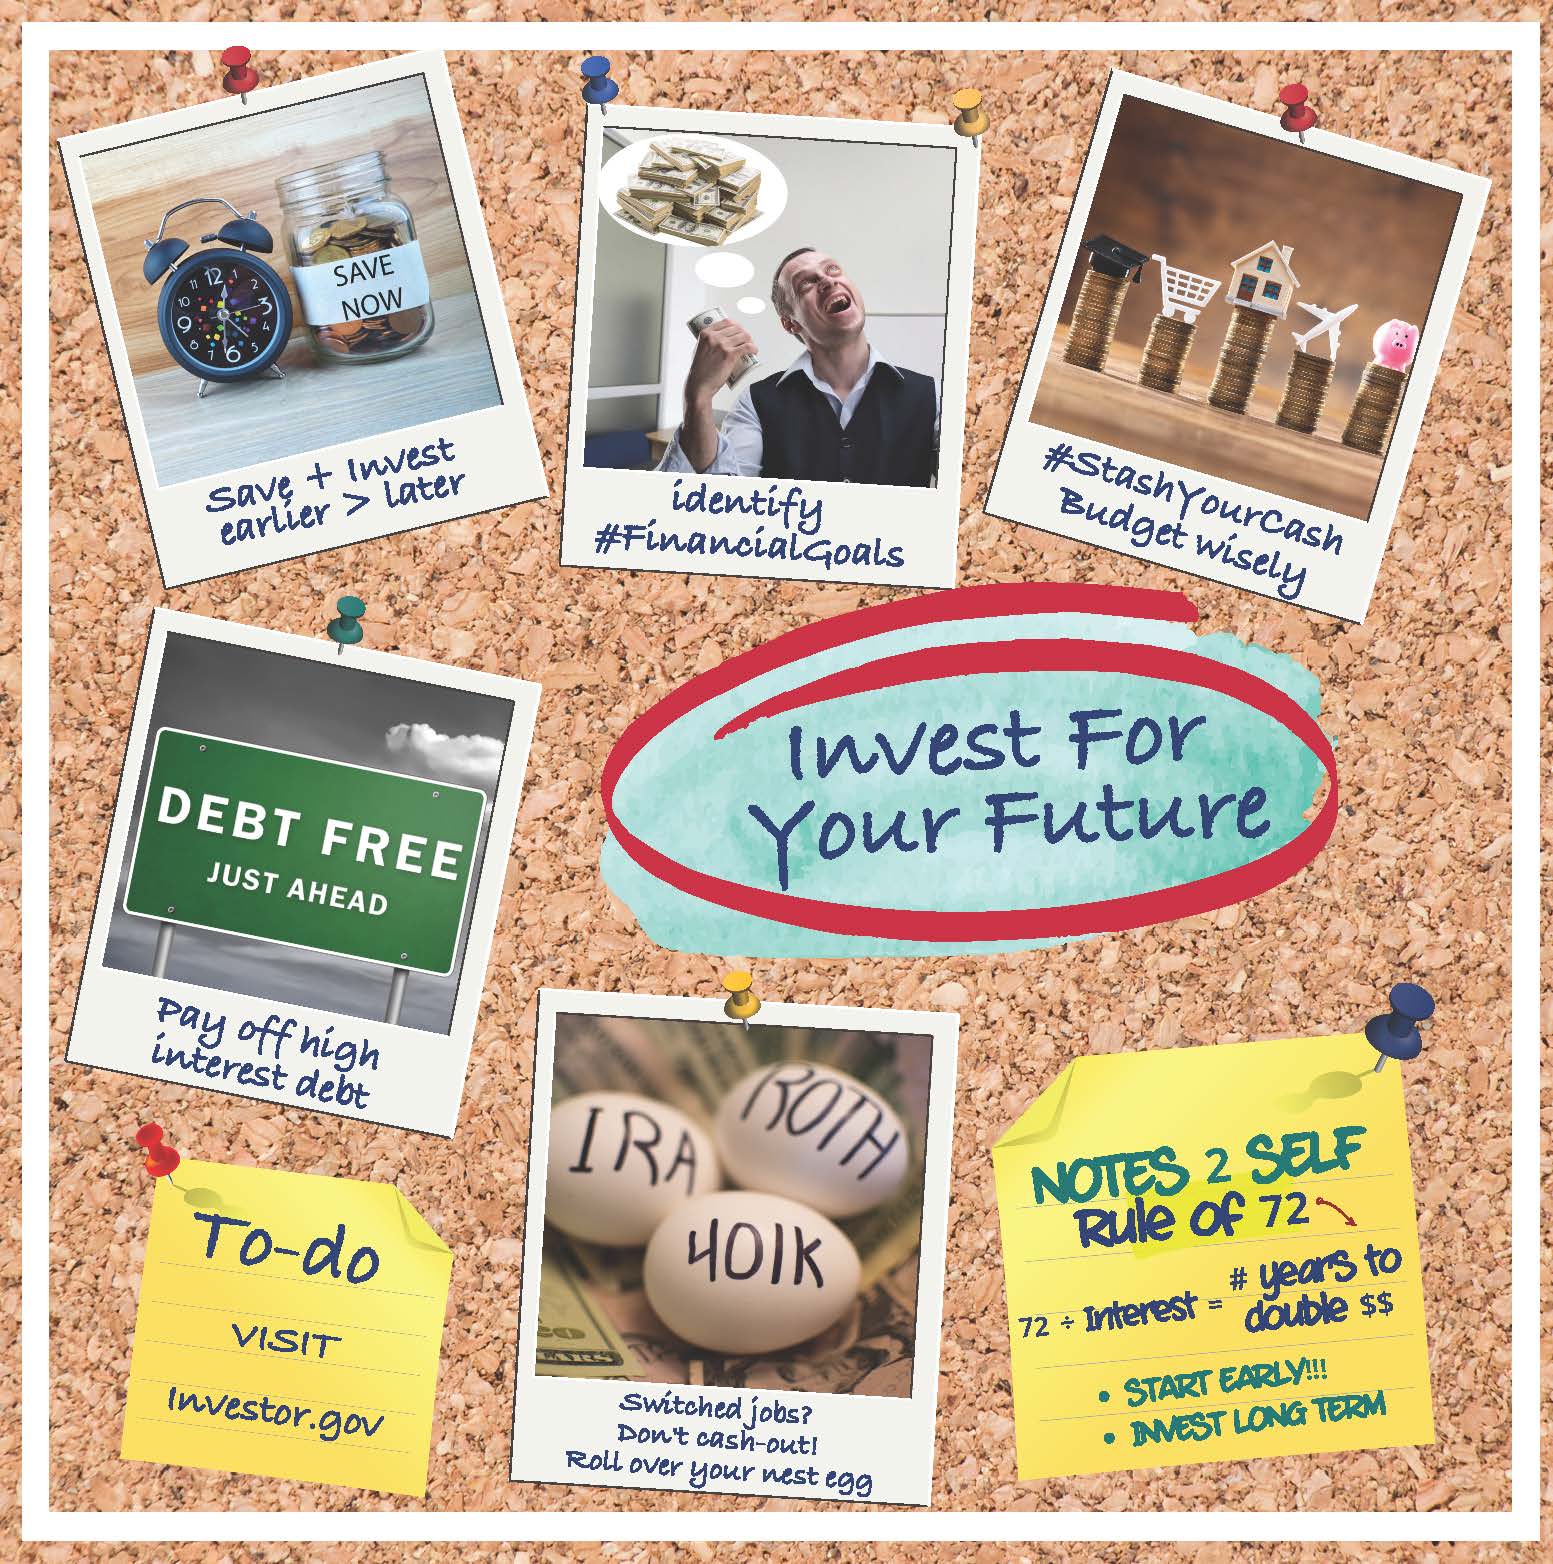 Picture of a vision board with invest in your future in the middle surrounded by other pictures captioned "Save + Invest", stash your cash, pay off high interest debt, rollover nest egg from previous job. 